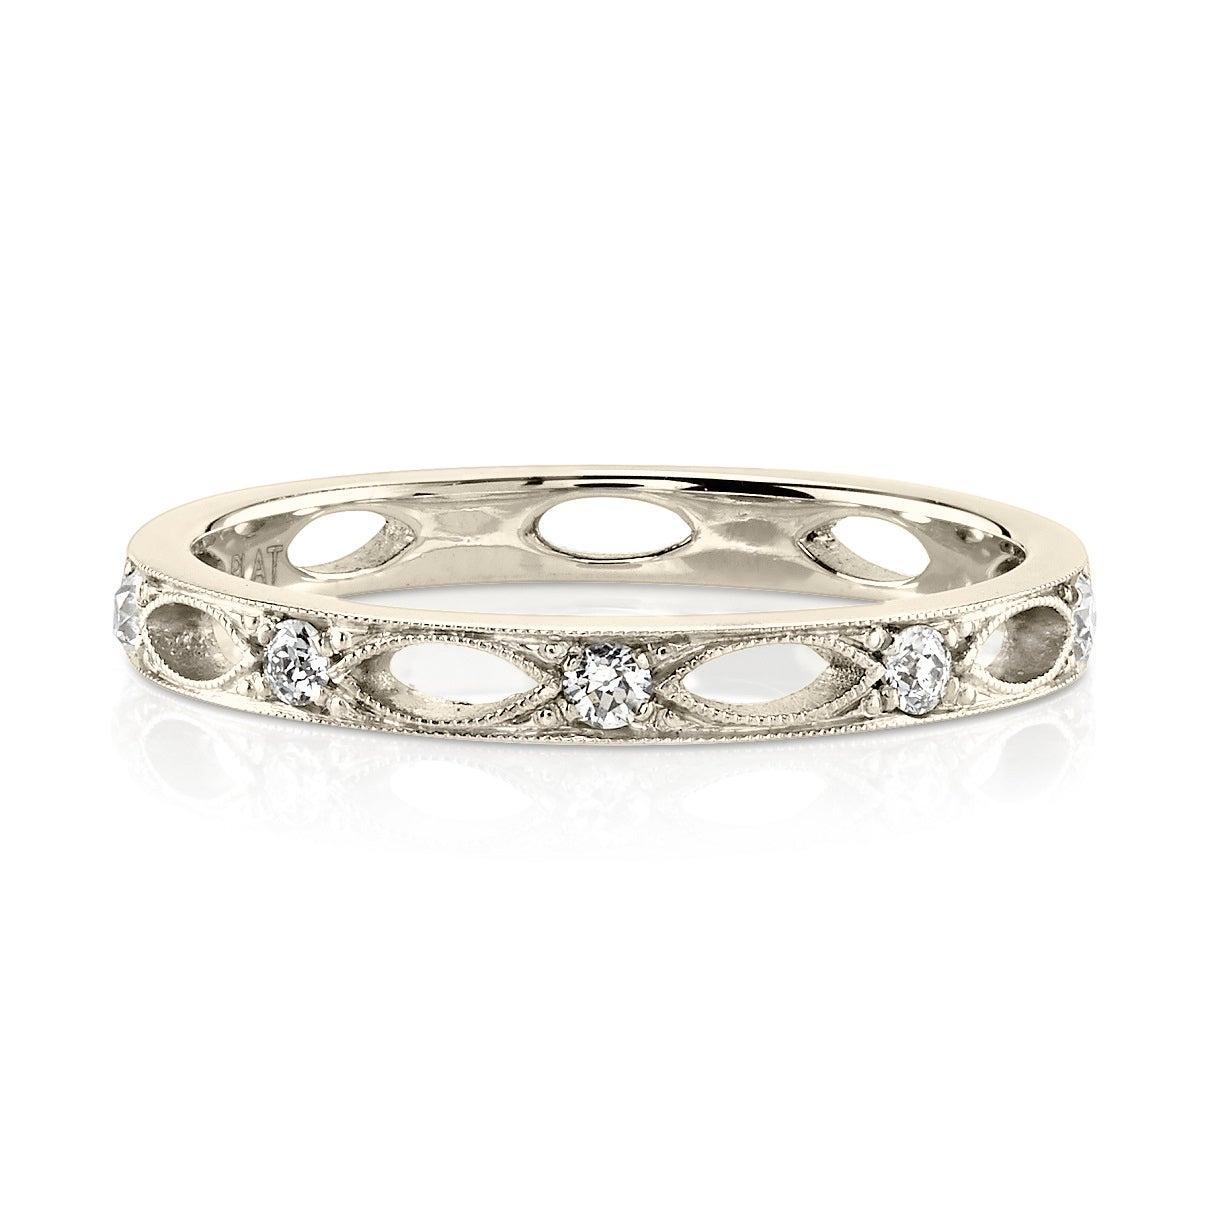 For Sale:  Handcrafted Alexander Old European Cut Diamond Eternity Band by Single Stone 2